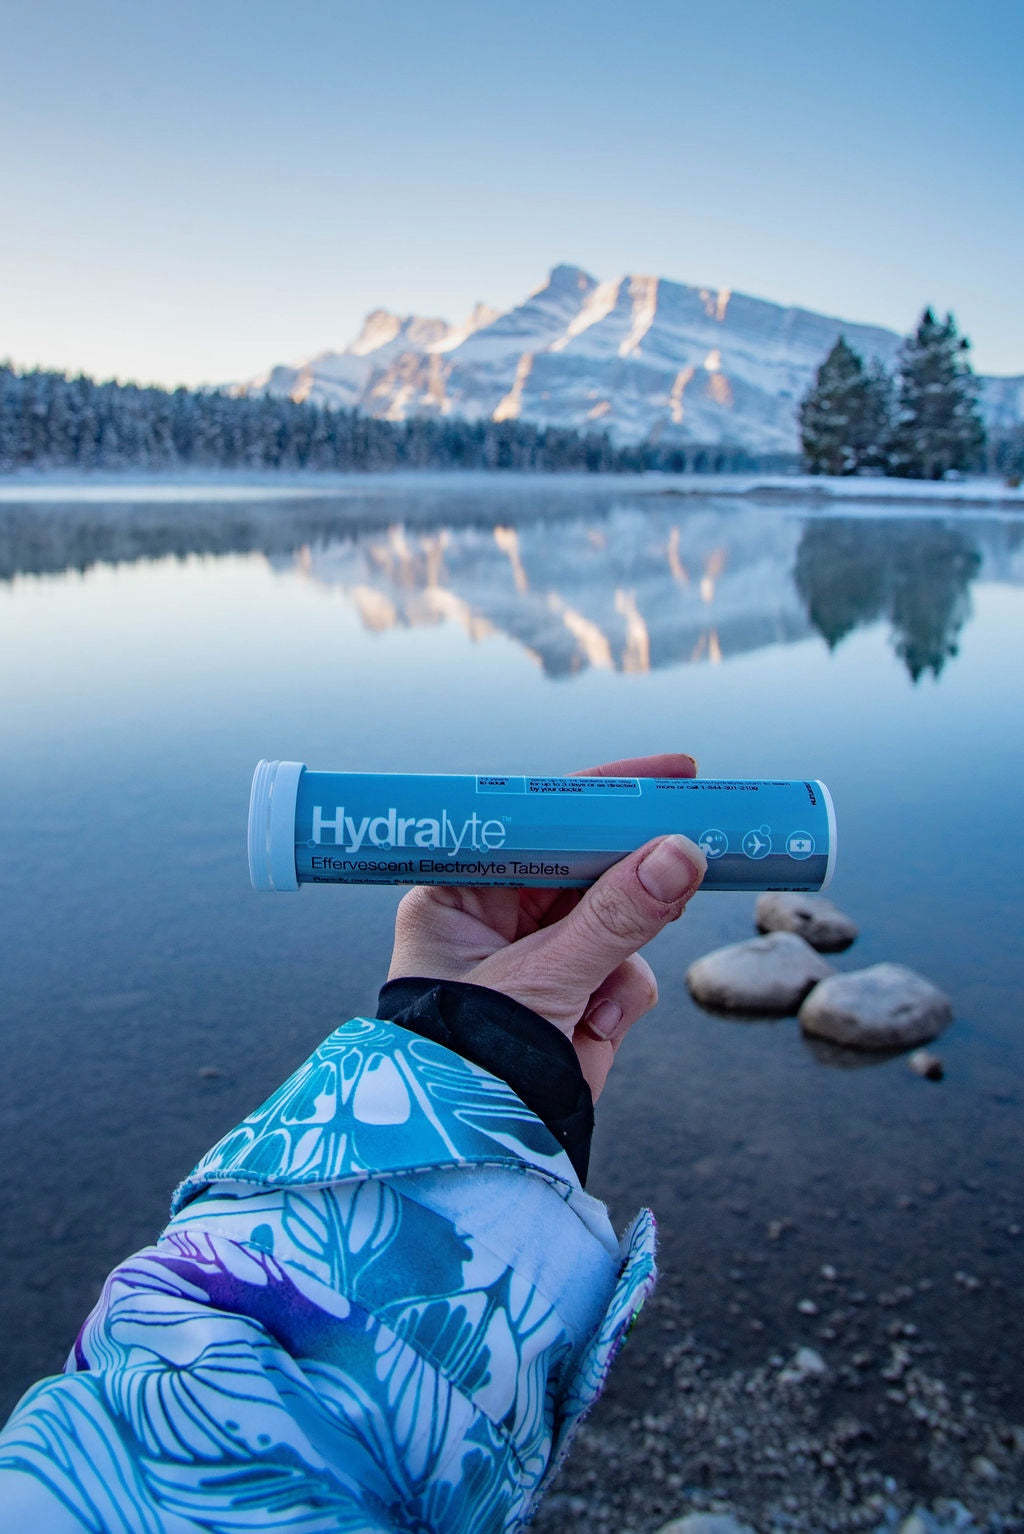 Using a rehydration supplement such as Hydralyte can help quickly replenish your fluids if experiencing winter dehydration.